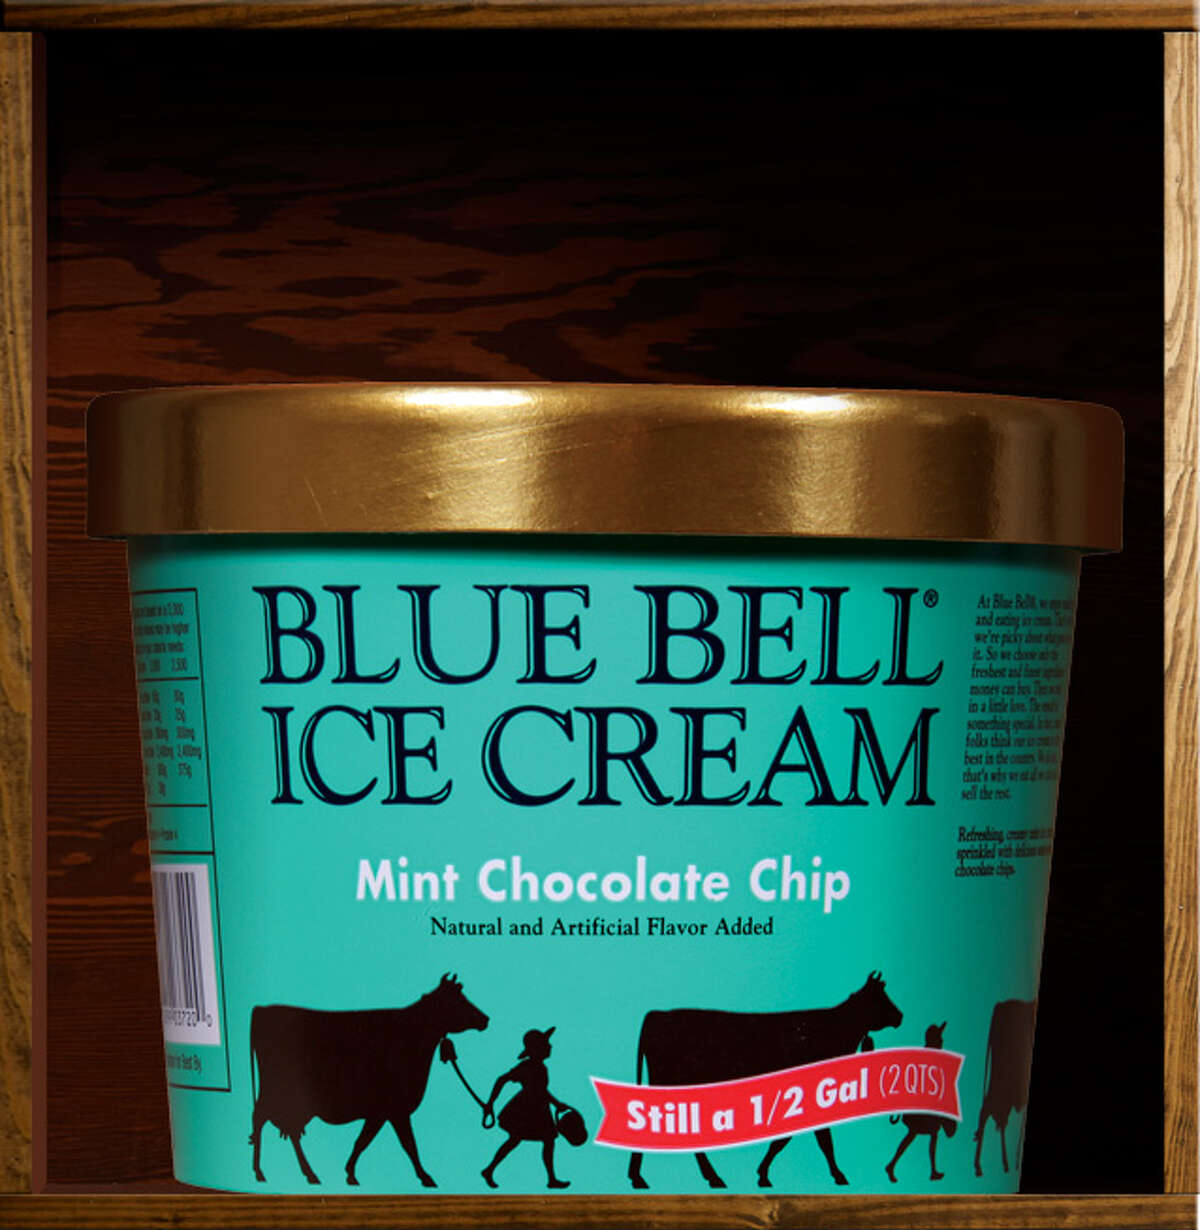 Texas Man Writes Hilarious Yet Thorough Review Of New Blue Bell Ice Cream Flavor 